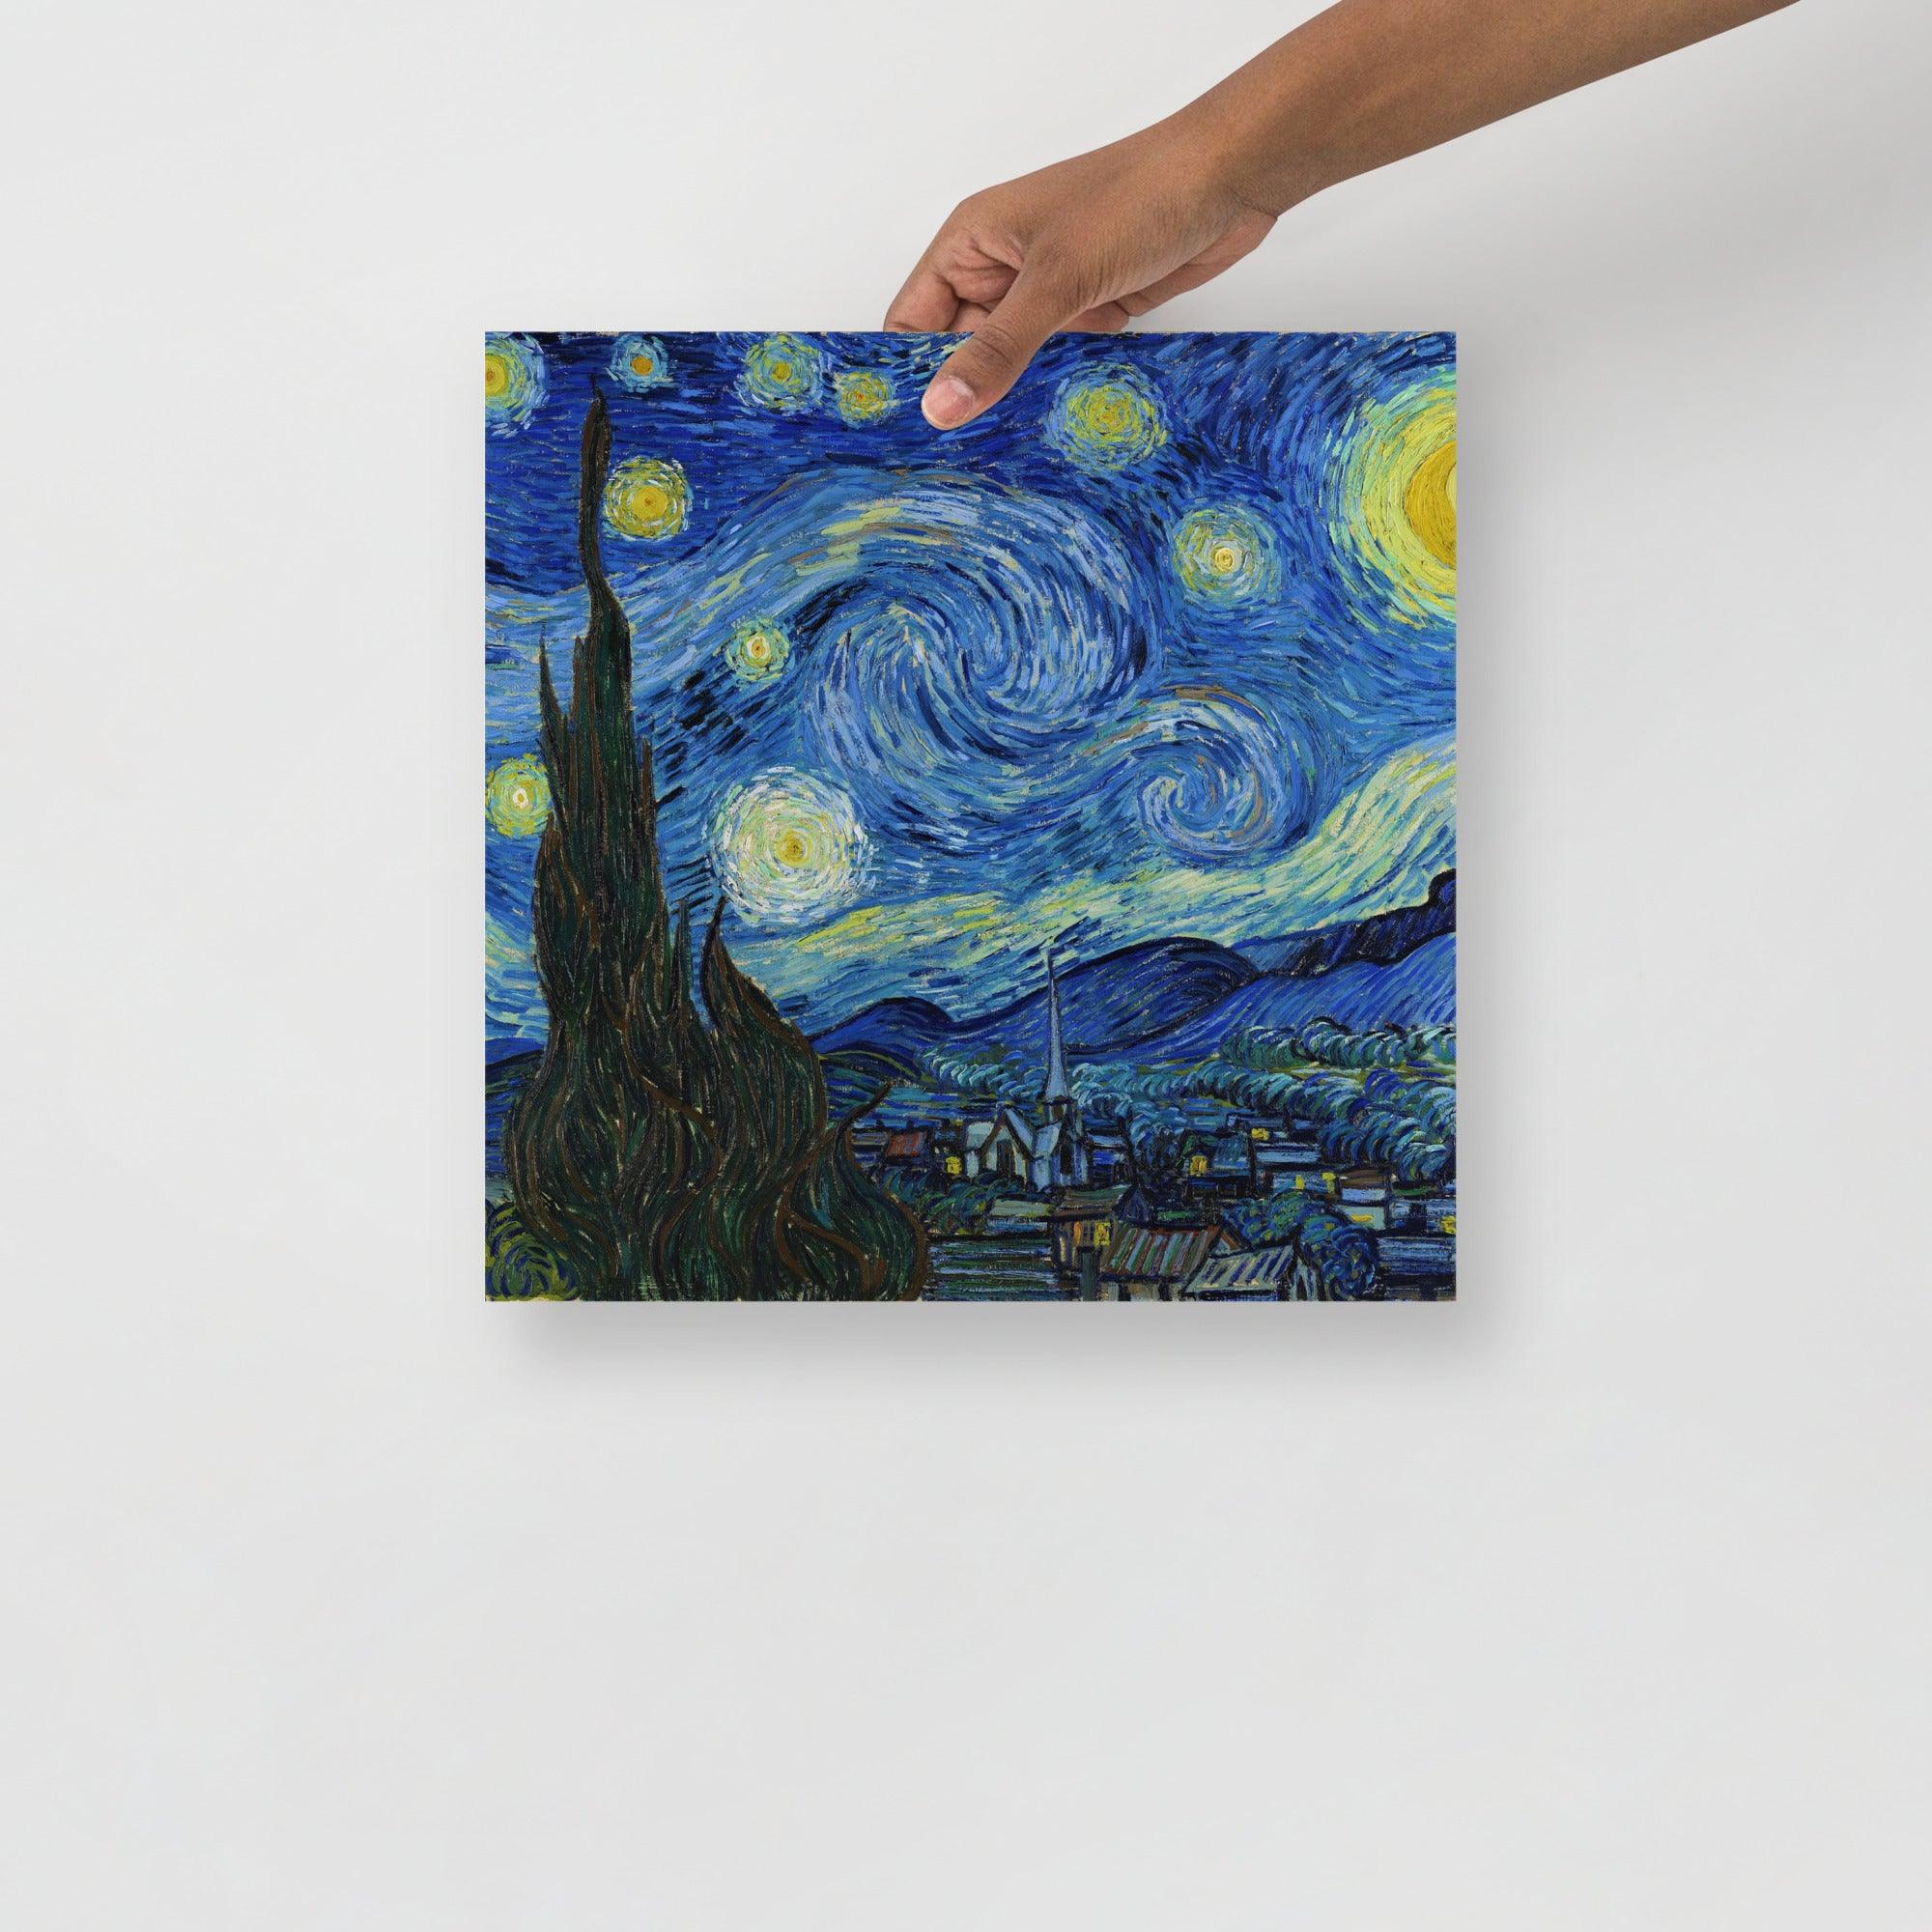 A The Starry Night by Vincent van Gogh poster on a plain backdrop in size 14x14”.